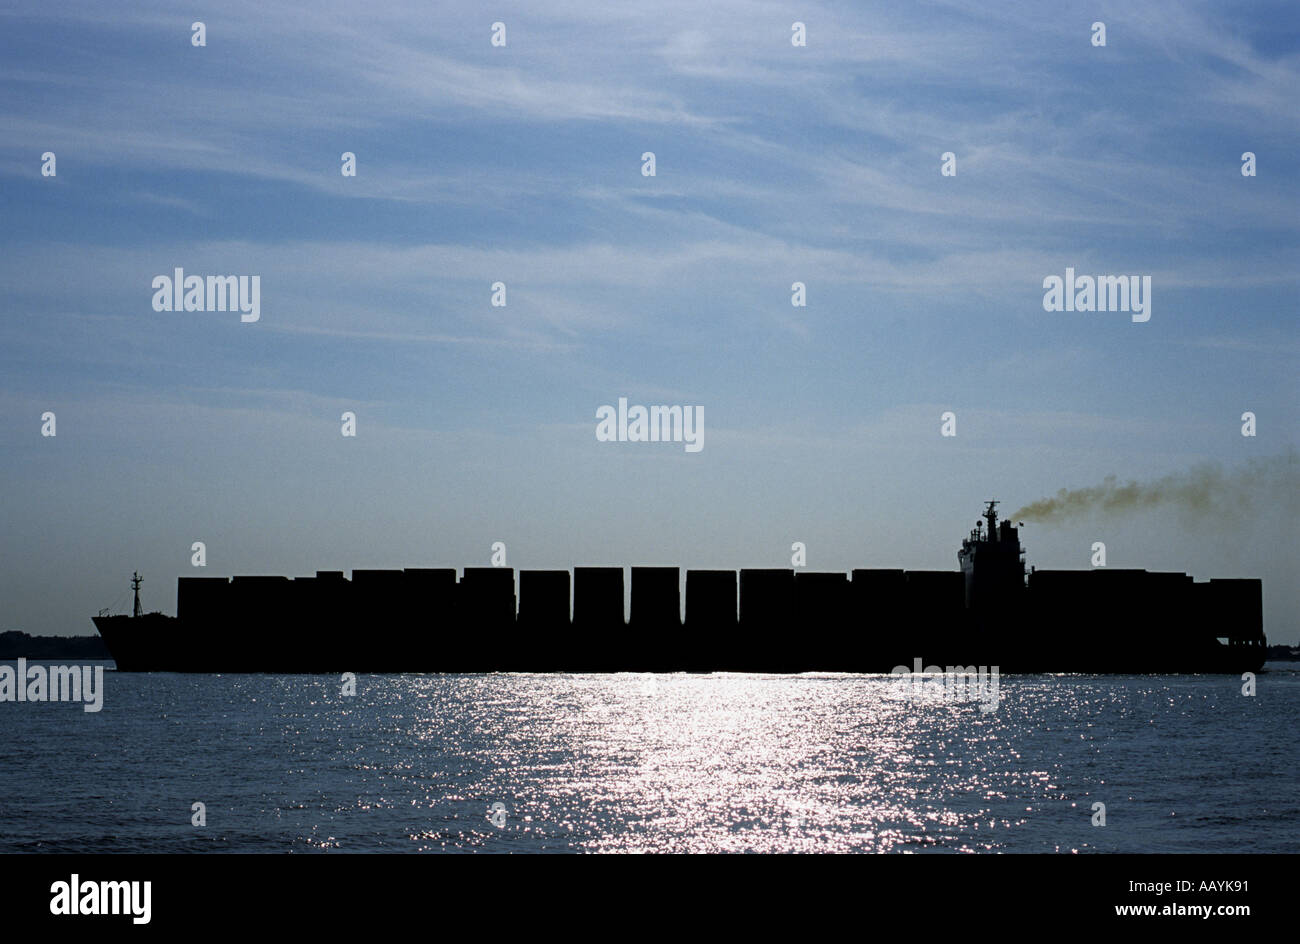 Container ship, Port of Felixstowe, Suffolk, UK. Stock Photo